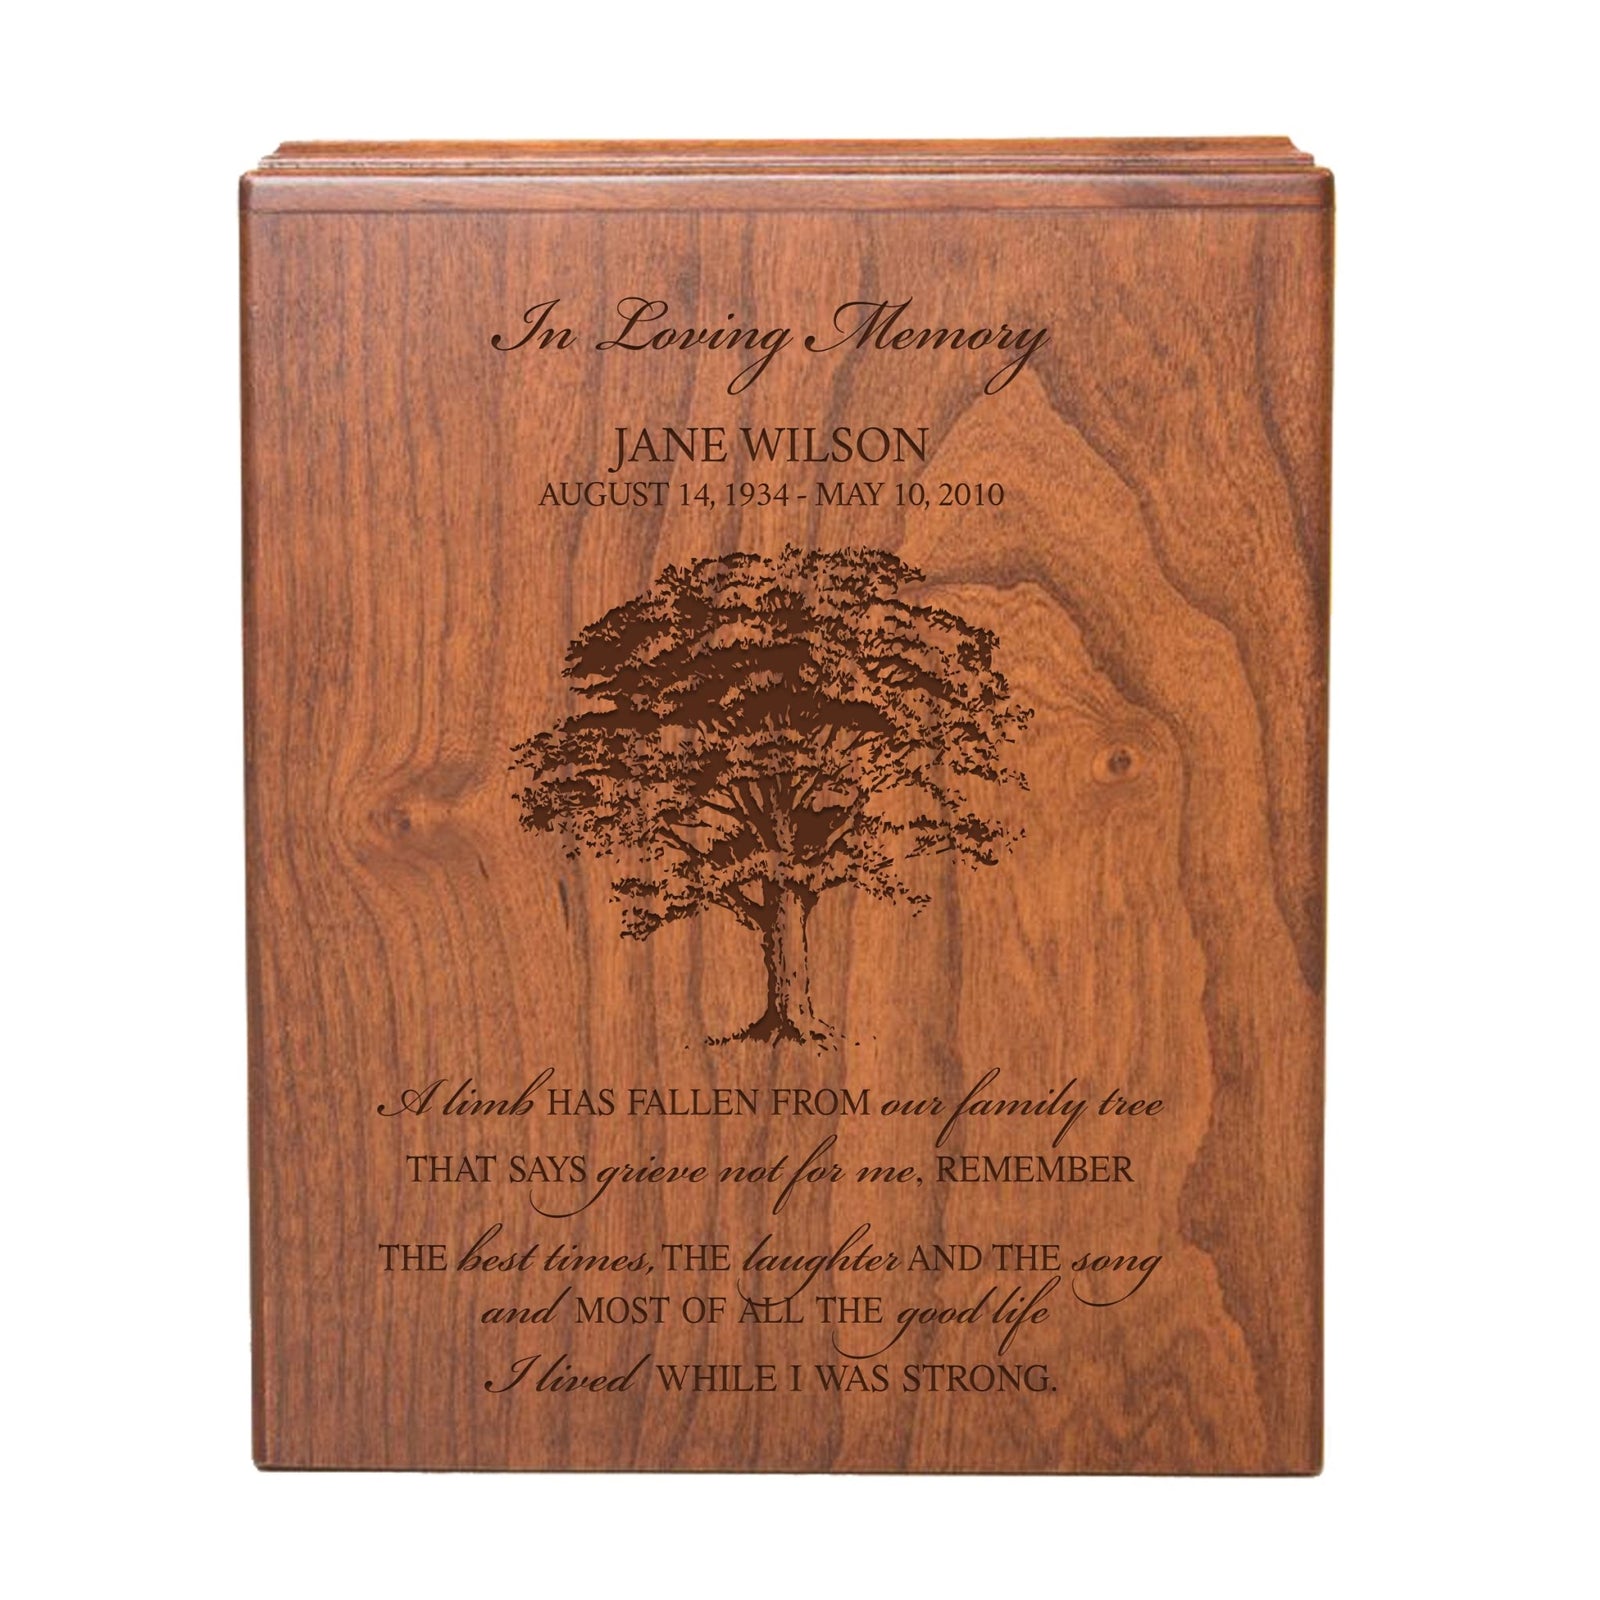 Custom Engraved A Limb Has Fallen Wooden Cremation Urn Box For Ashes Holds 280 Cu Inches - Family Tree Funeral Urn - LifeSong Milestones